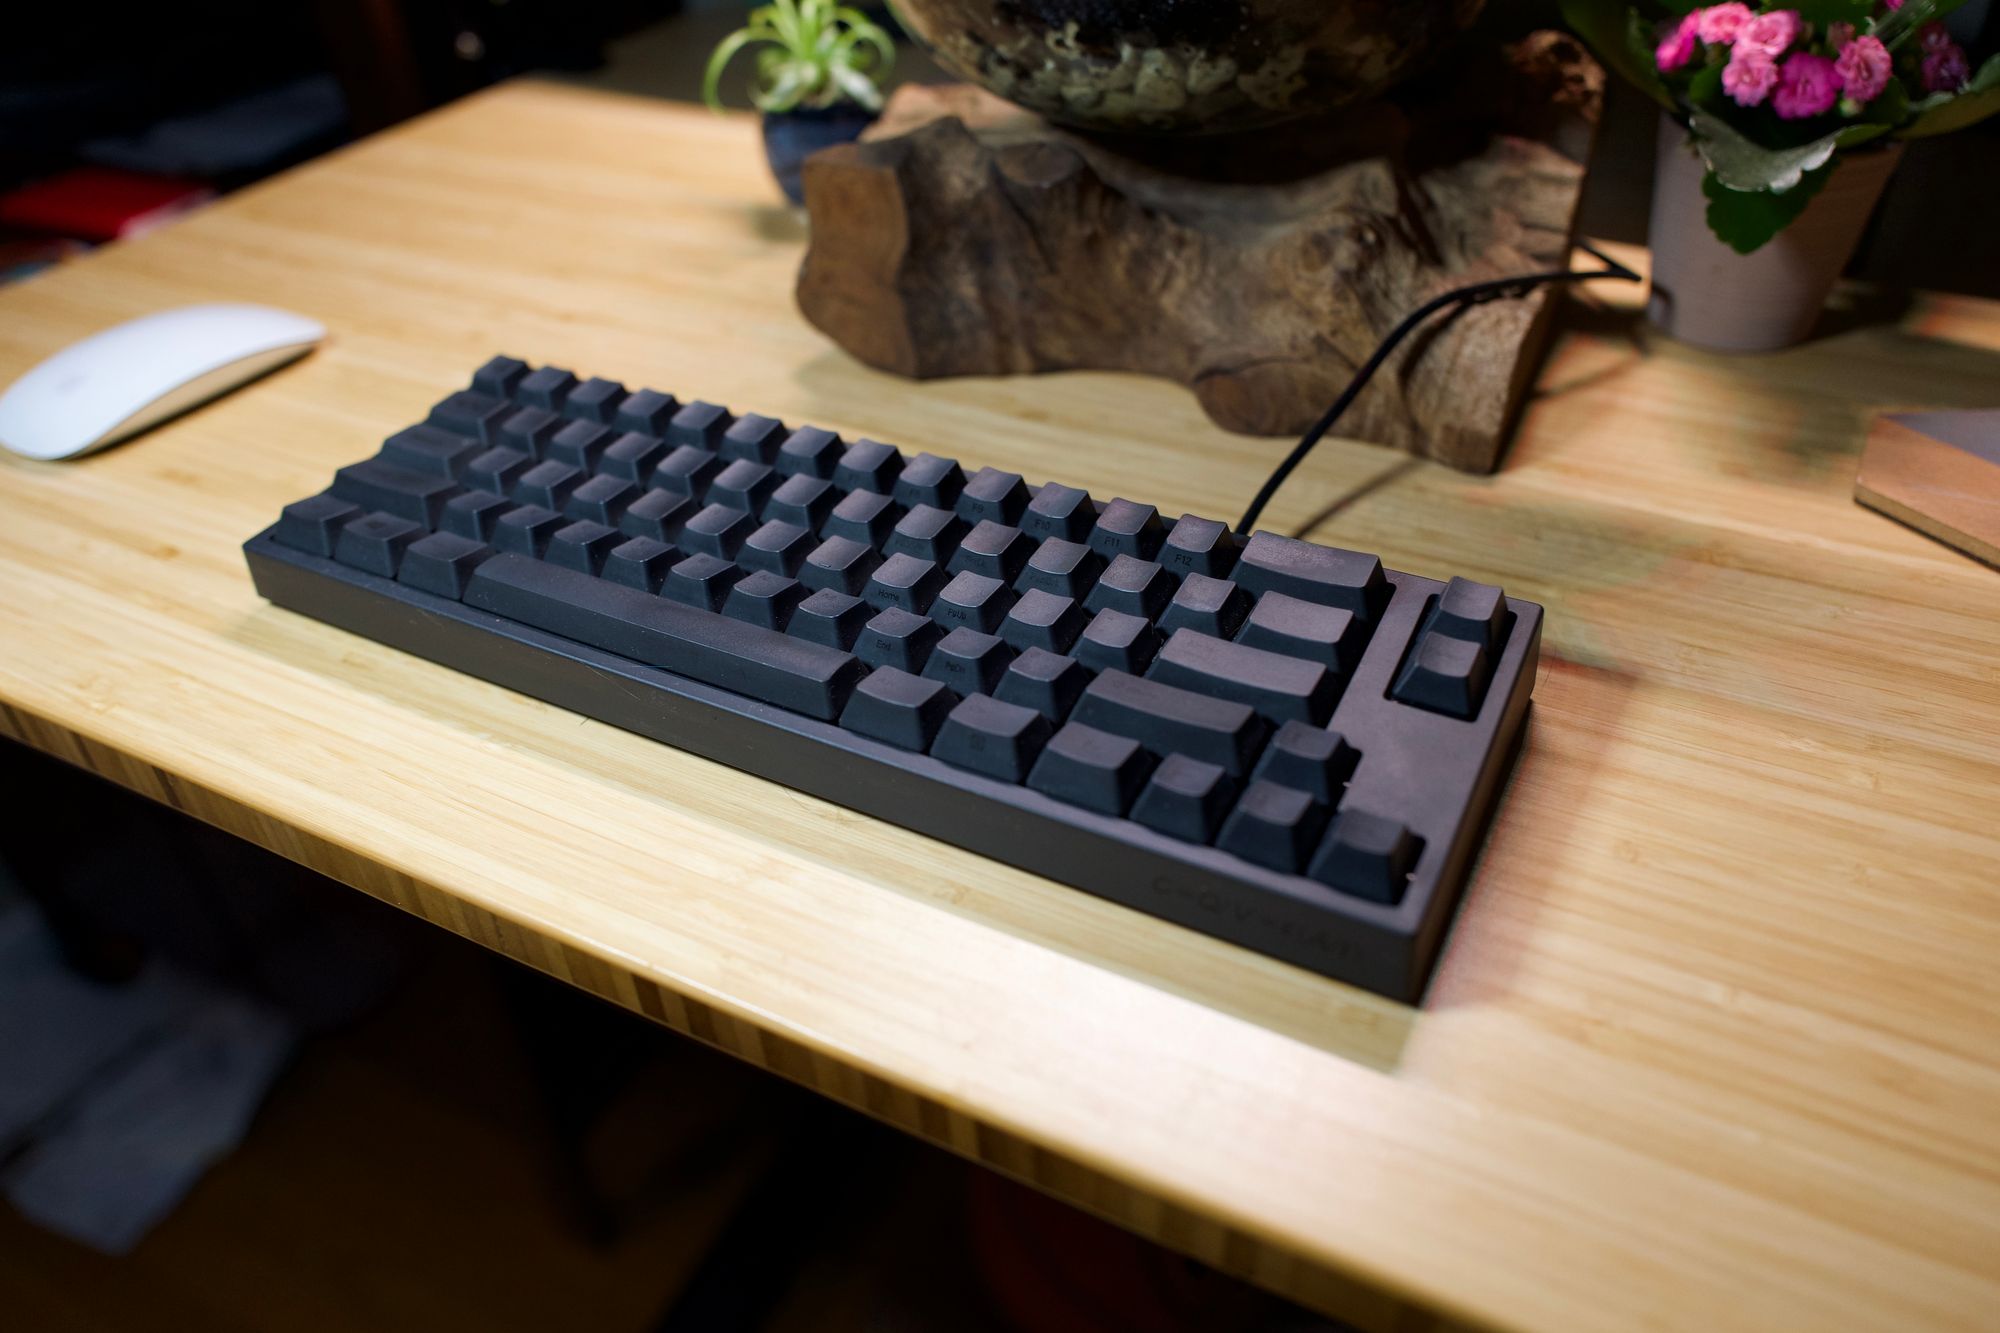 Leopold FC660C Review: Shadow Play